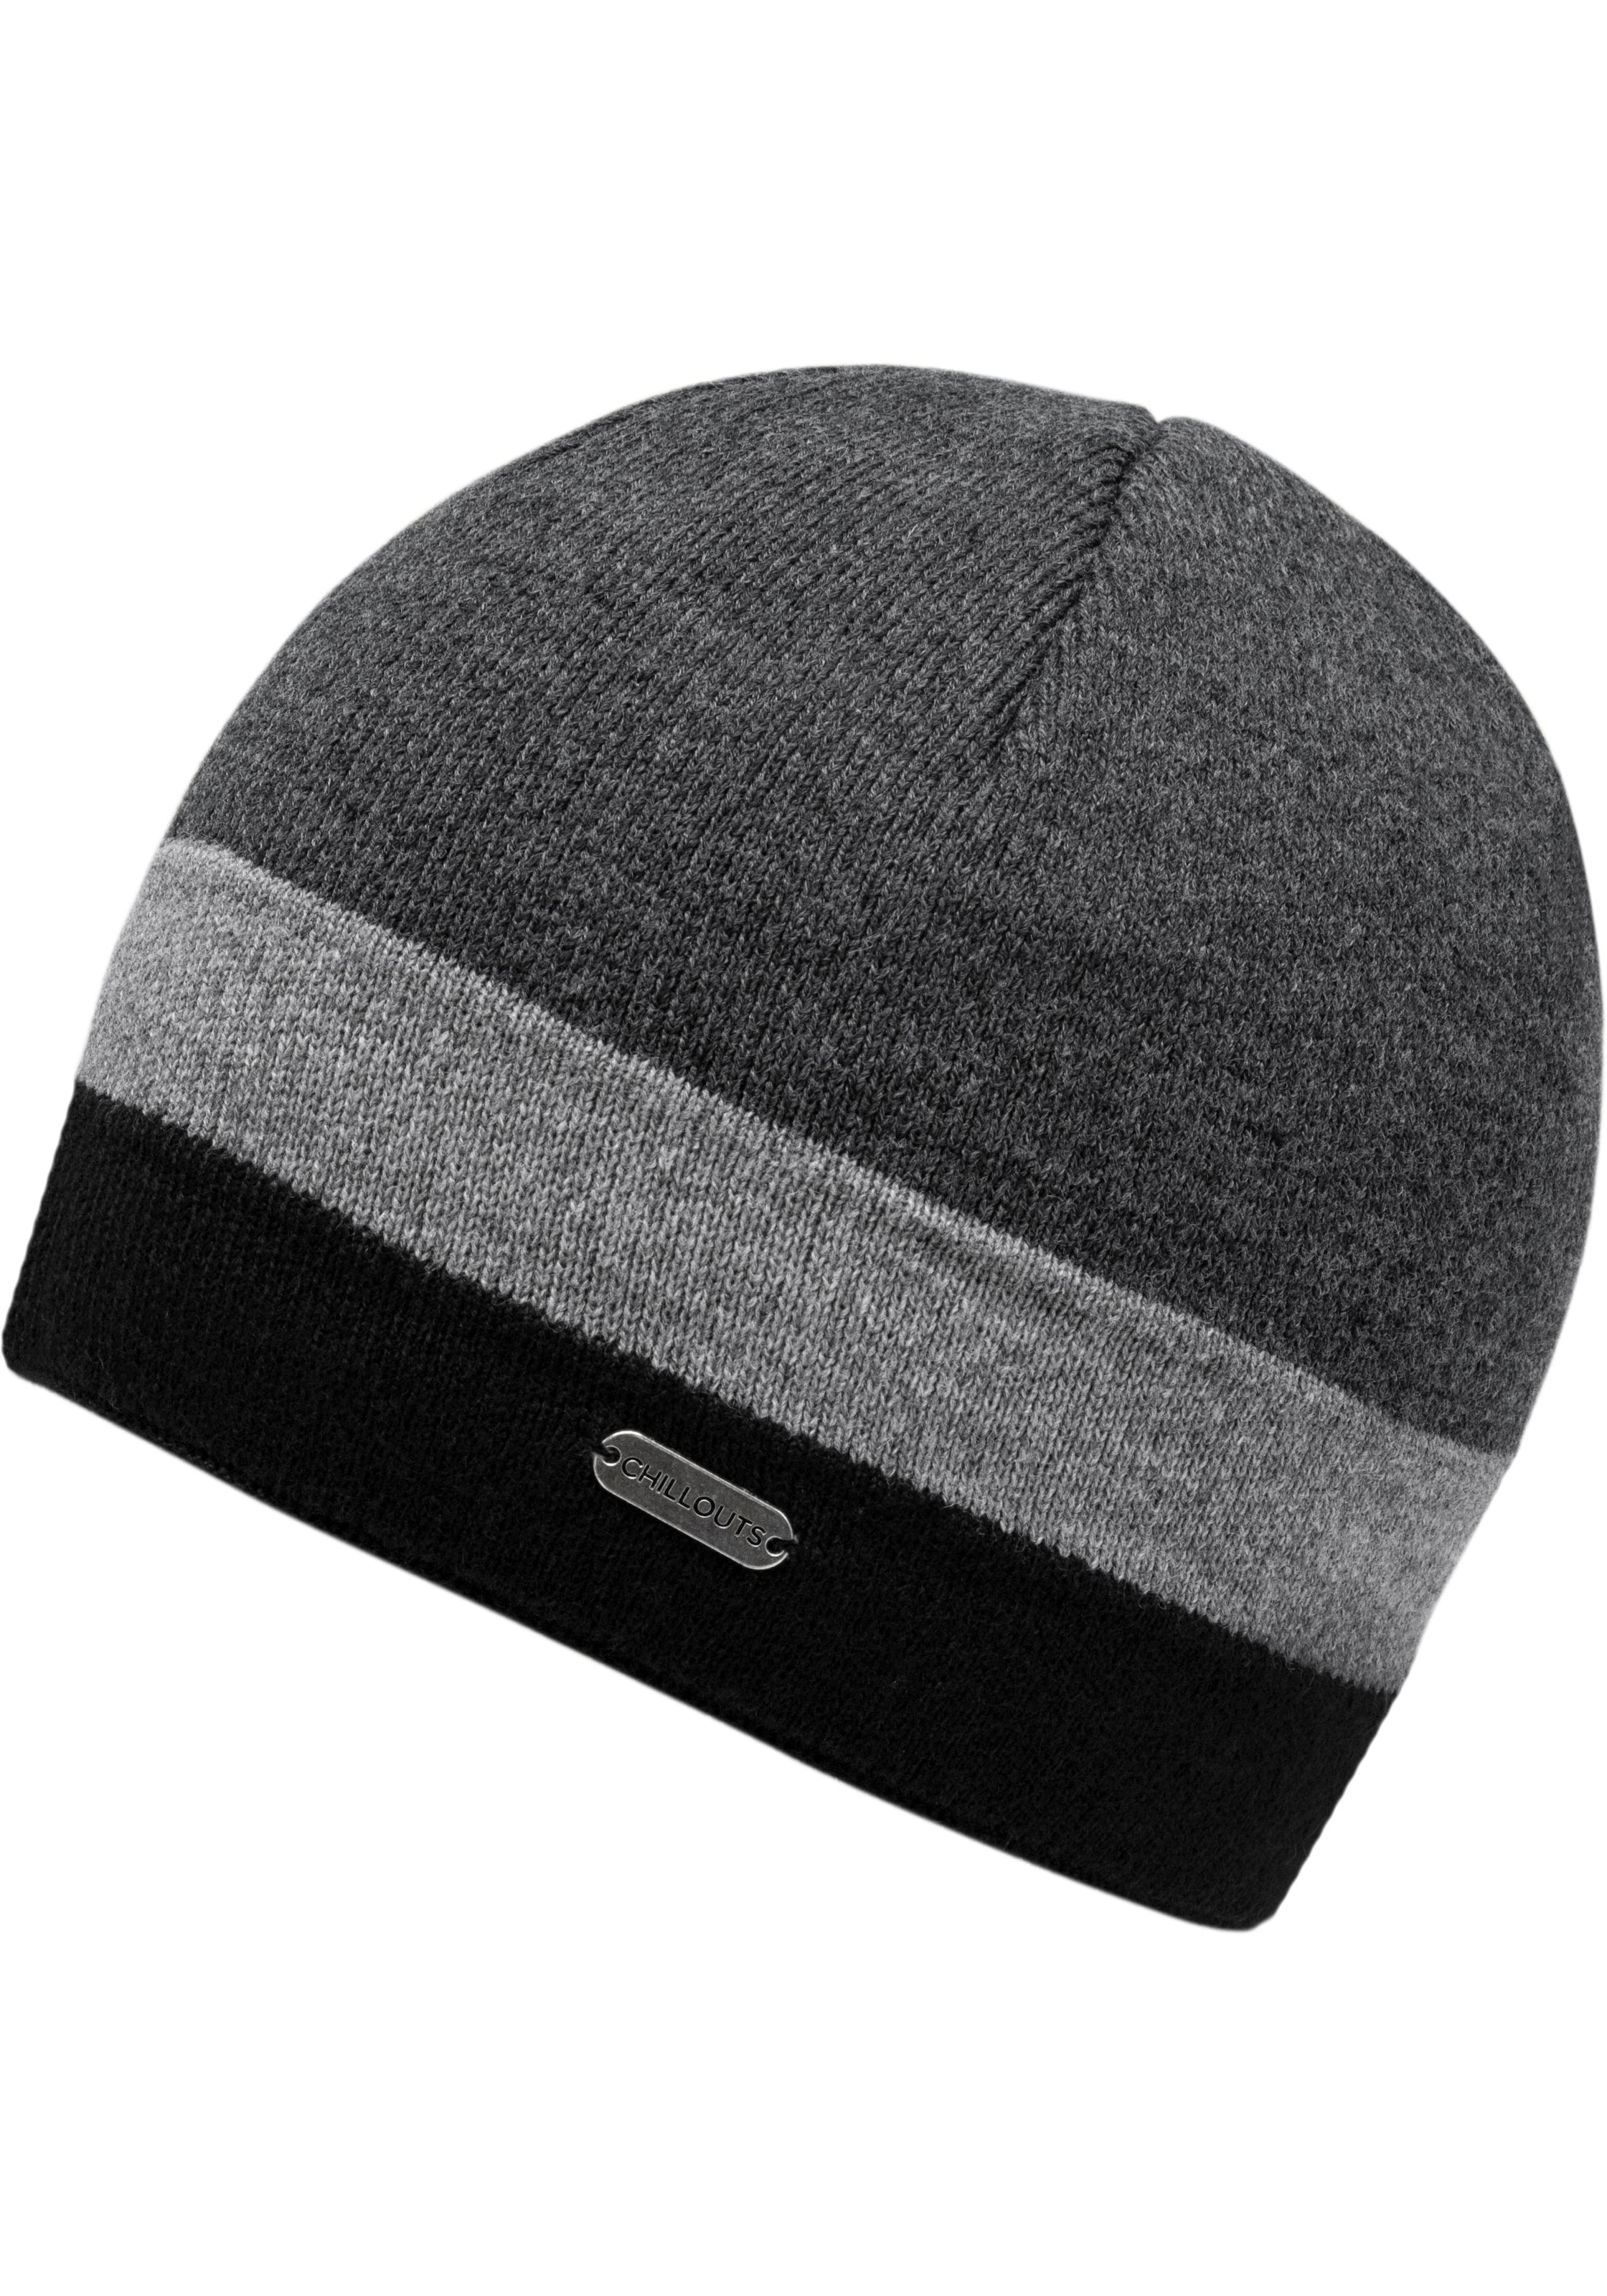 chillouts Beanie »Johnny Hat«, | Johnny Hat UNIVERSAL kaufen online